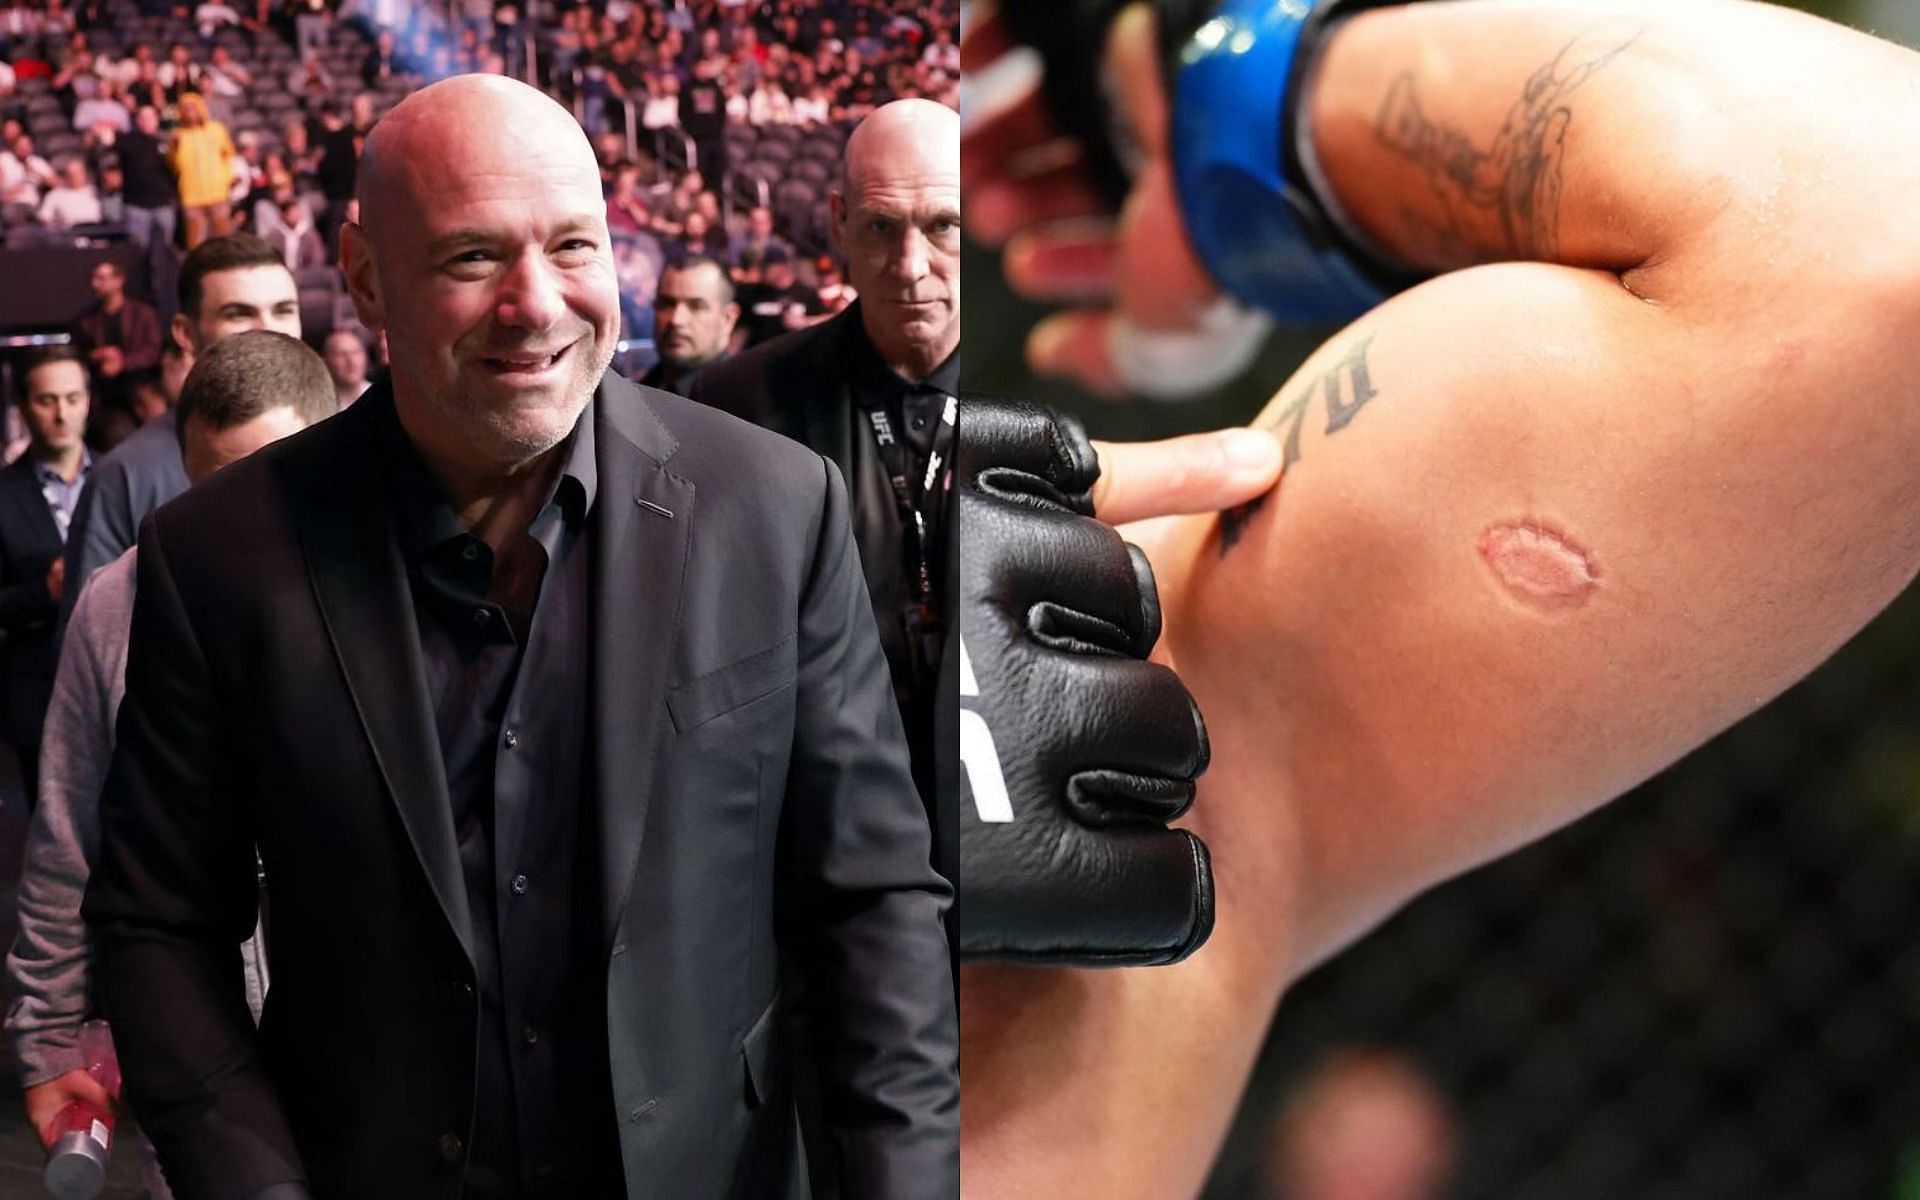 Dana White comments on the biting controversy [Image credits: @ufc on Instagram]